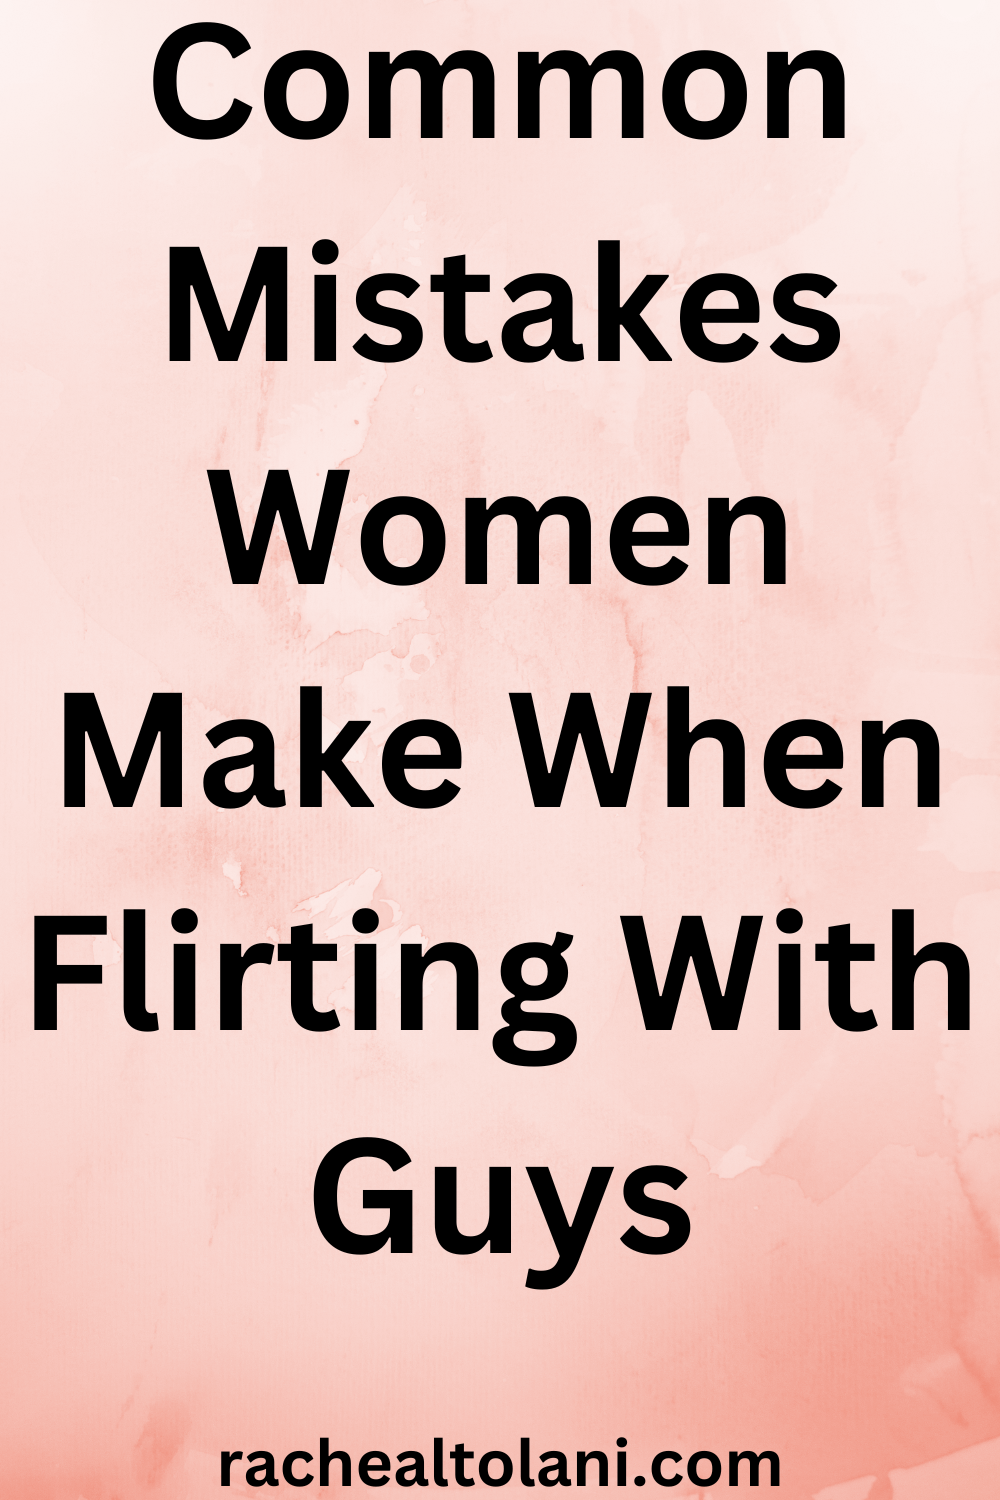 Mistakes women make when flirting with guys